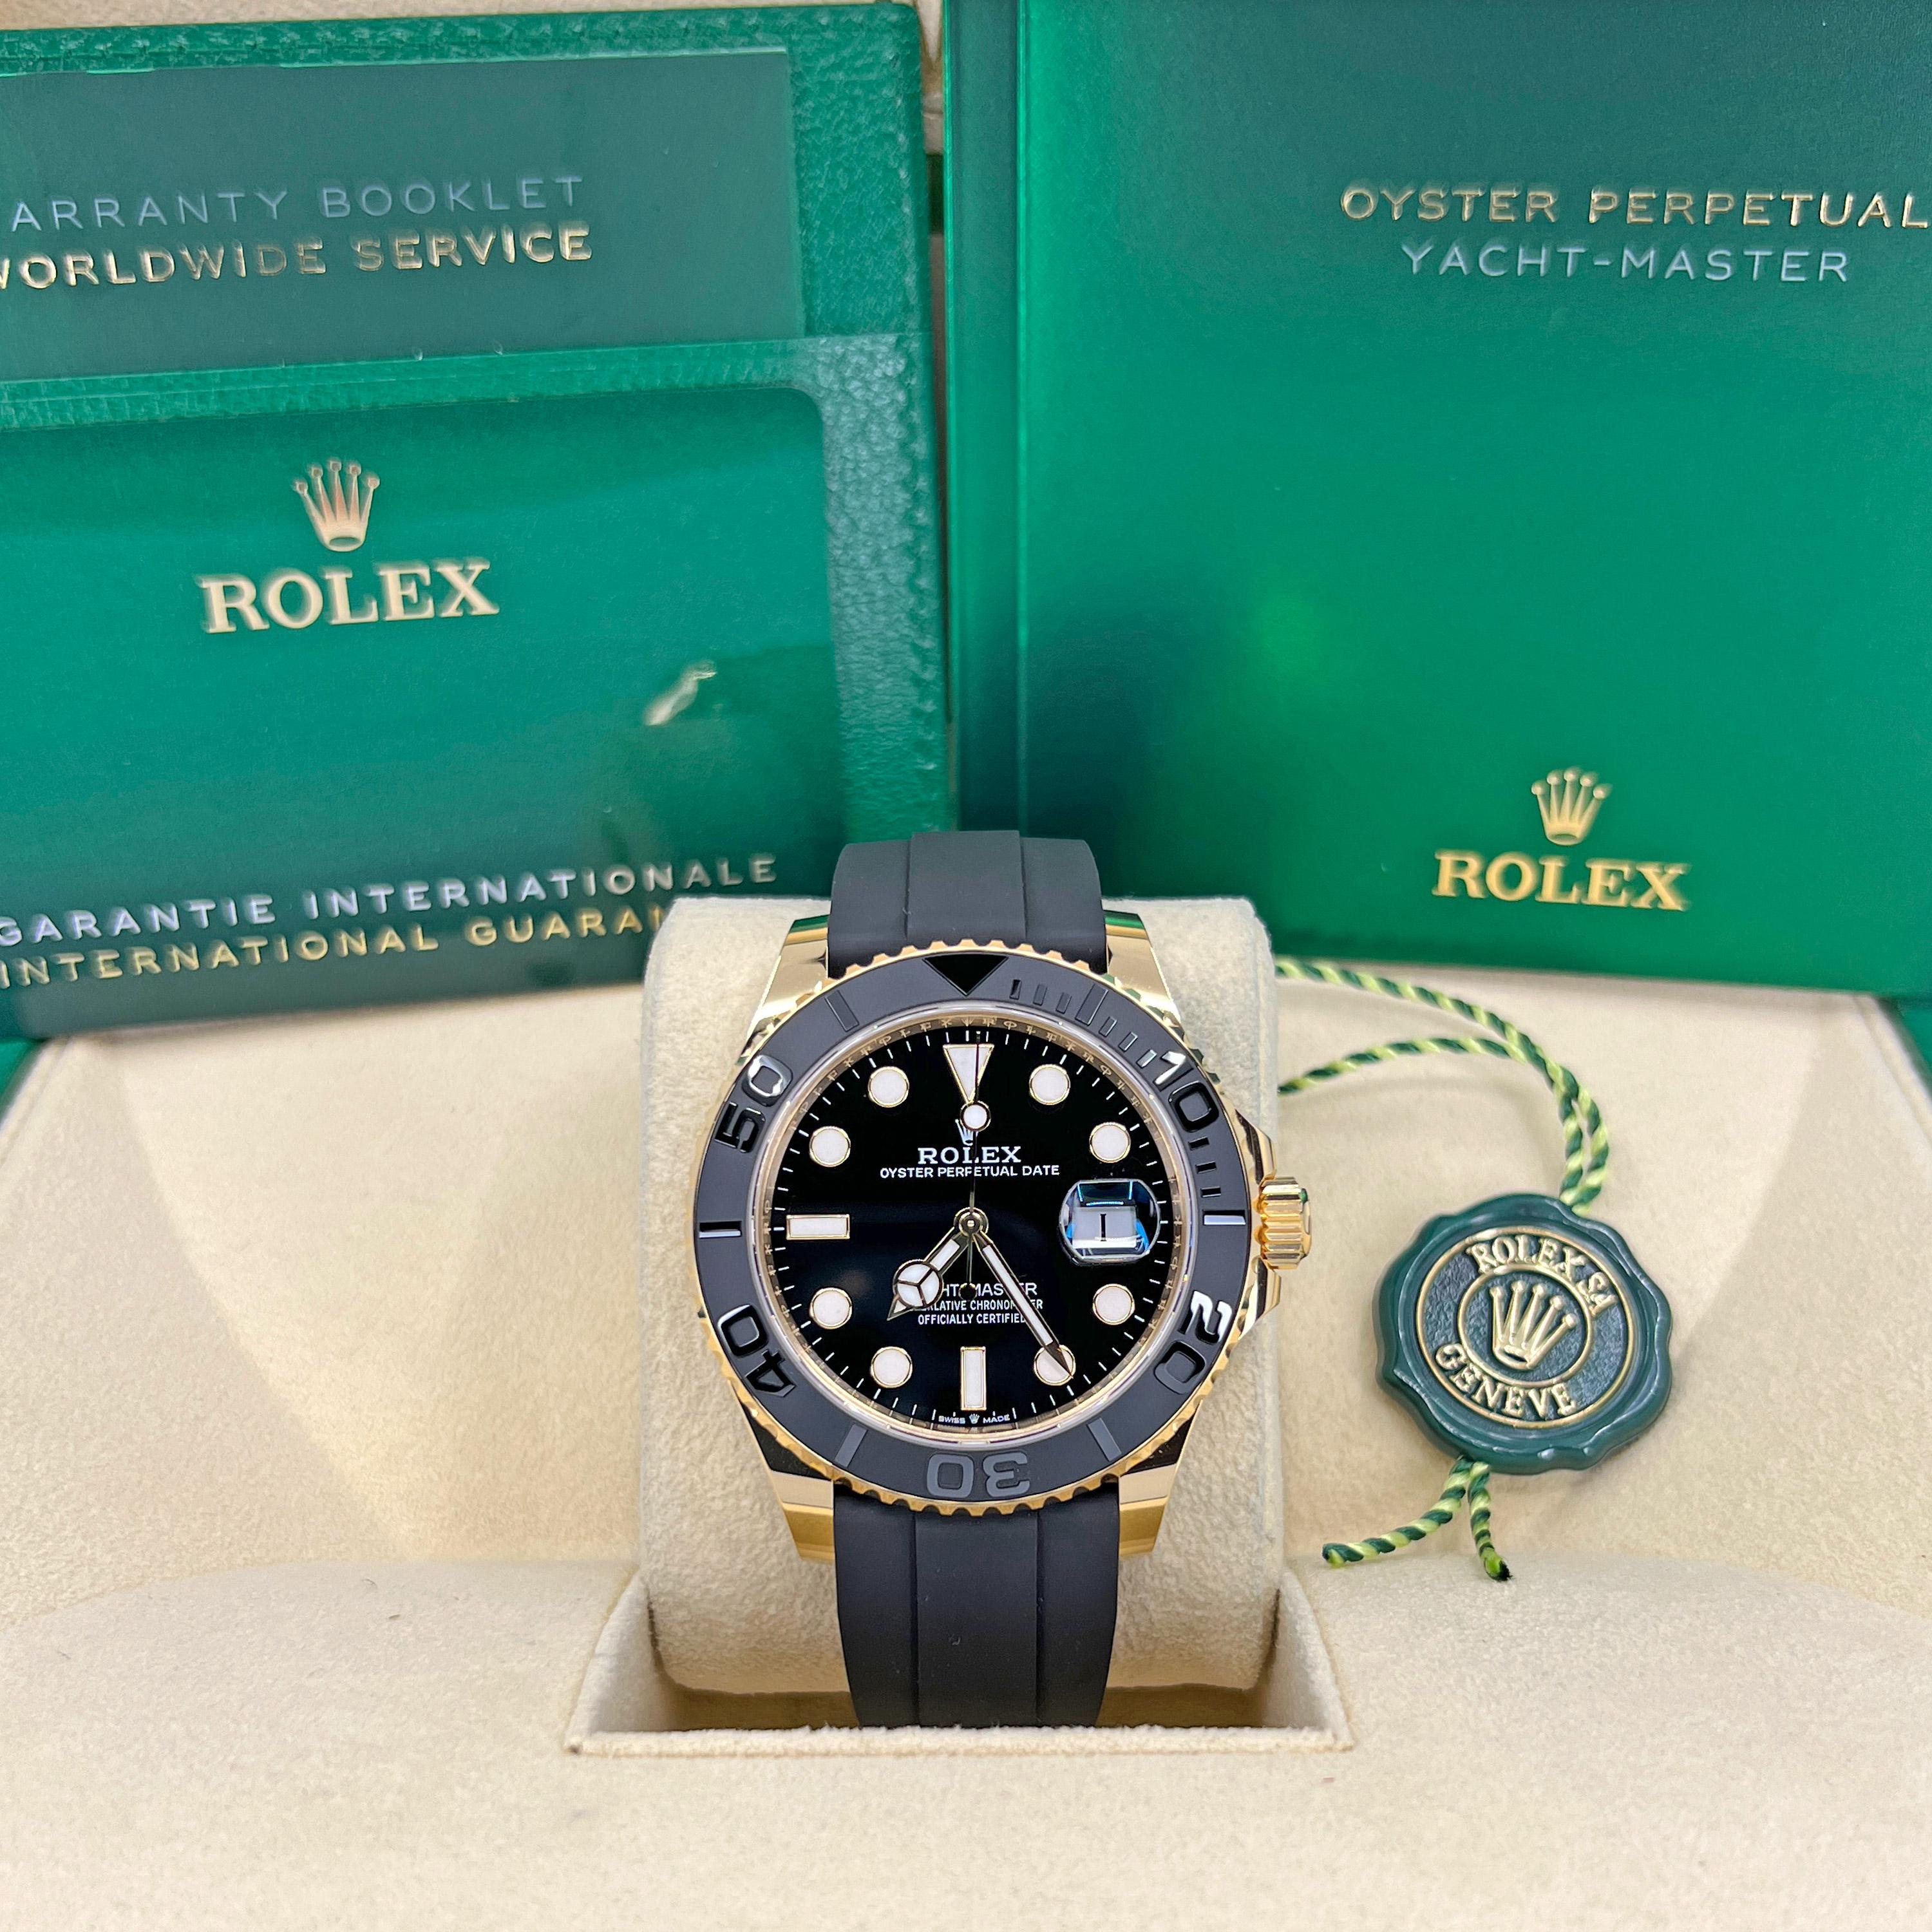 Unworn classic watch Rolex Yacht-Master 42mm, 18k Yellow Gold, Ref# 226658-0001 - luxury, elegance and practicality.

Make: Rolex
Model: Yacht-Master
Reference: 226658-0001
Diameter: 42 mm
Case material: 18k Yellow Gold
Dial color: Black dial with a